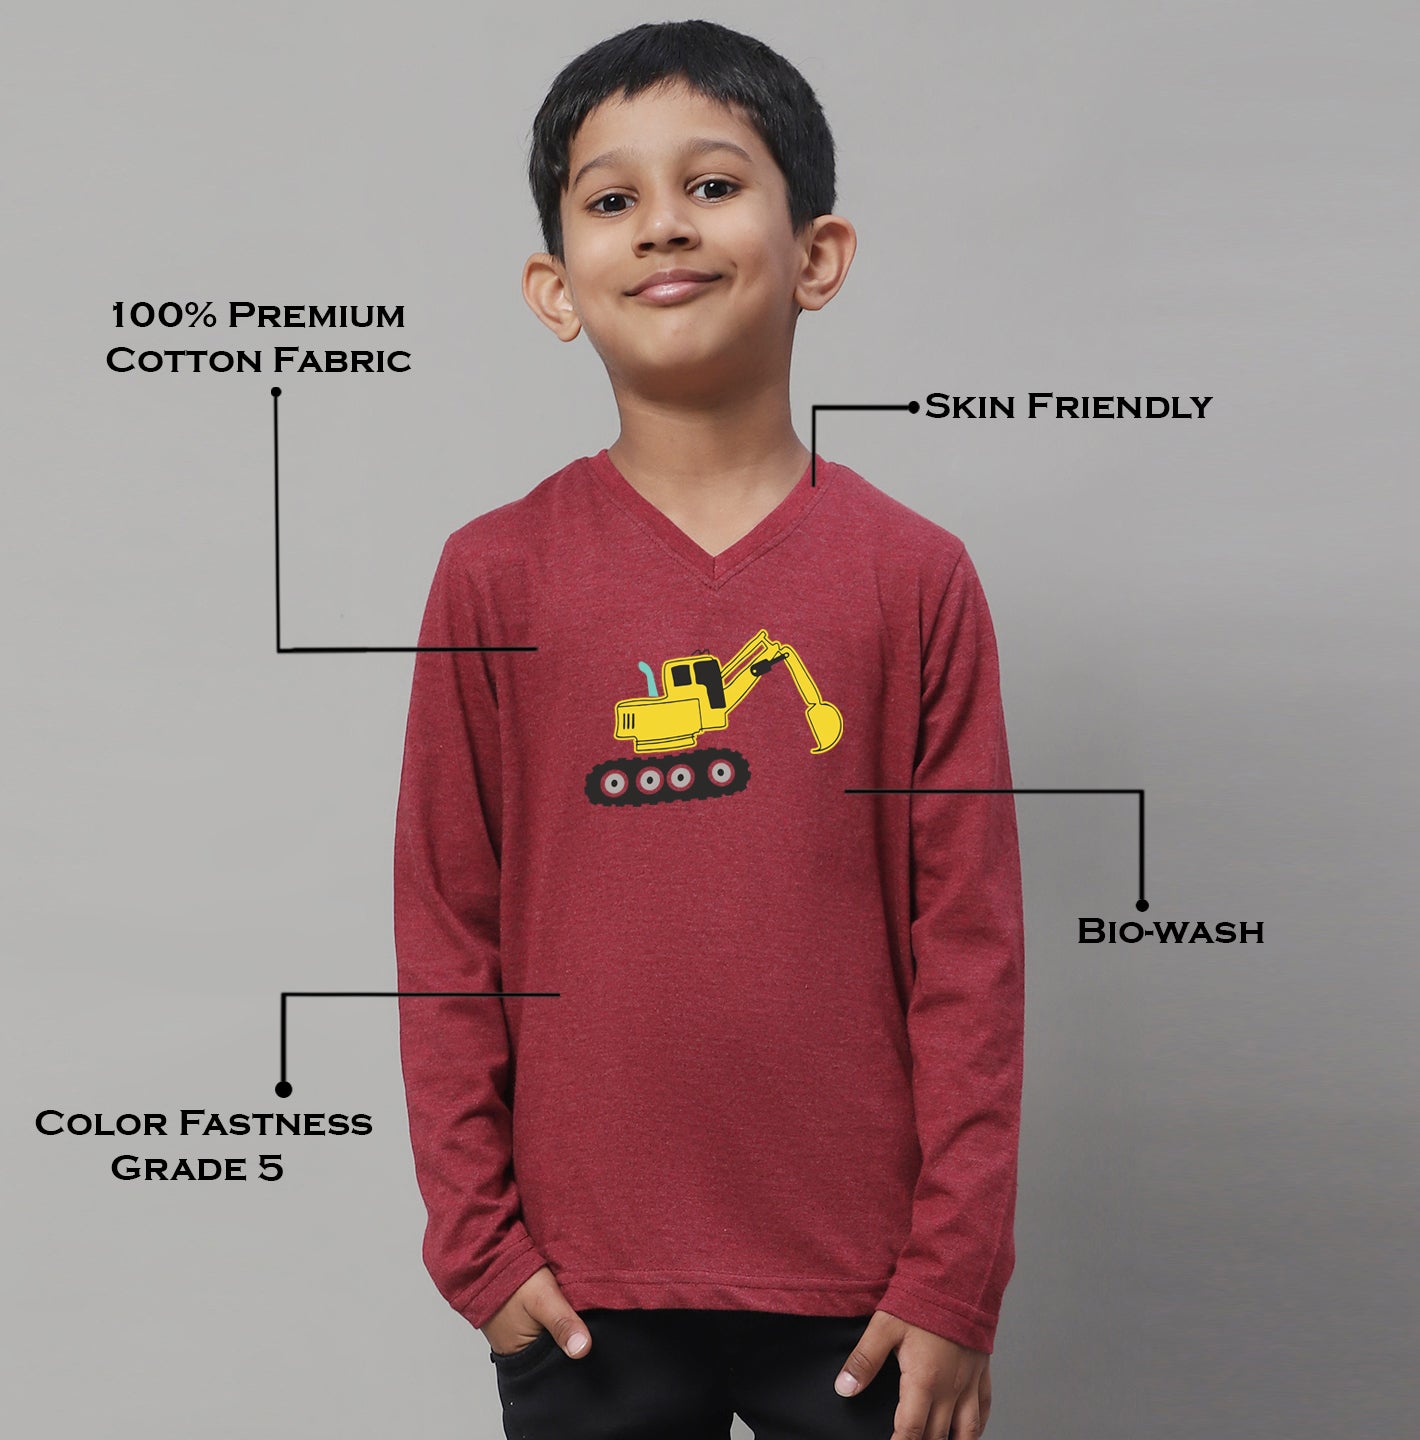 Boys Excavator Casual Fit Printed T-Shirt - Friskers